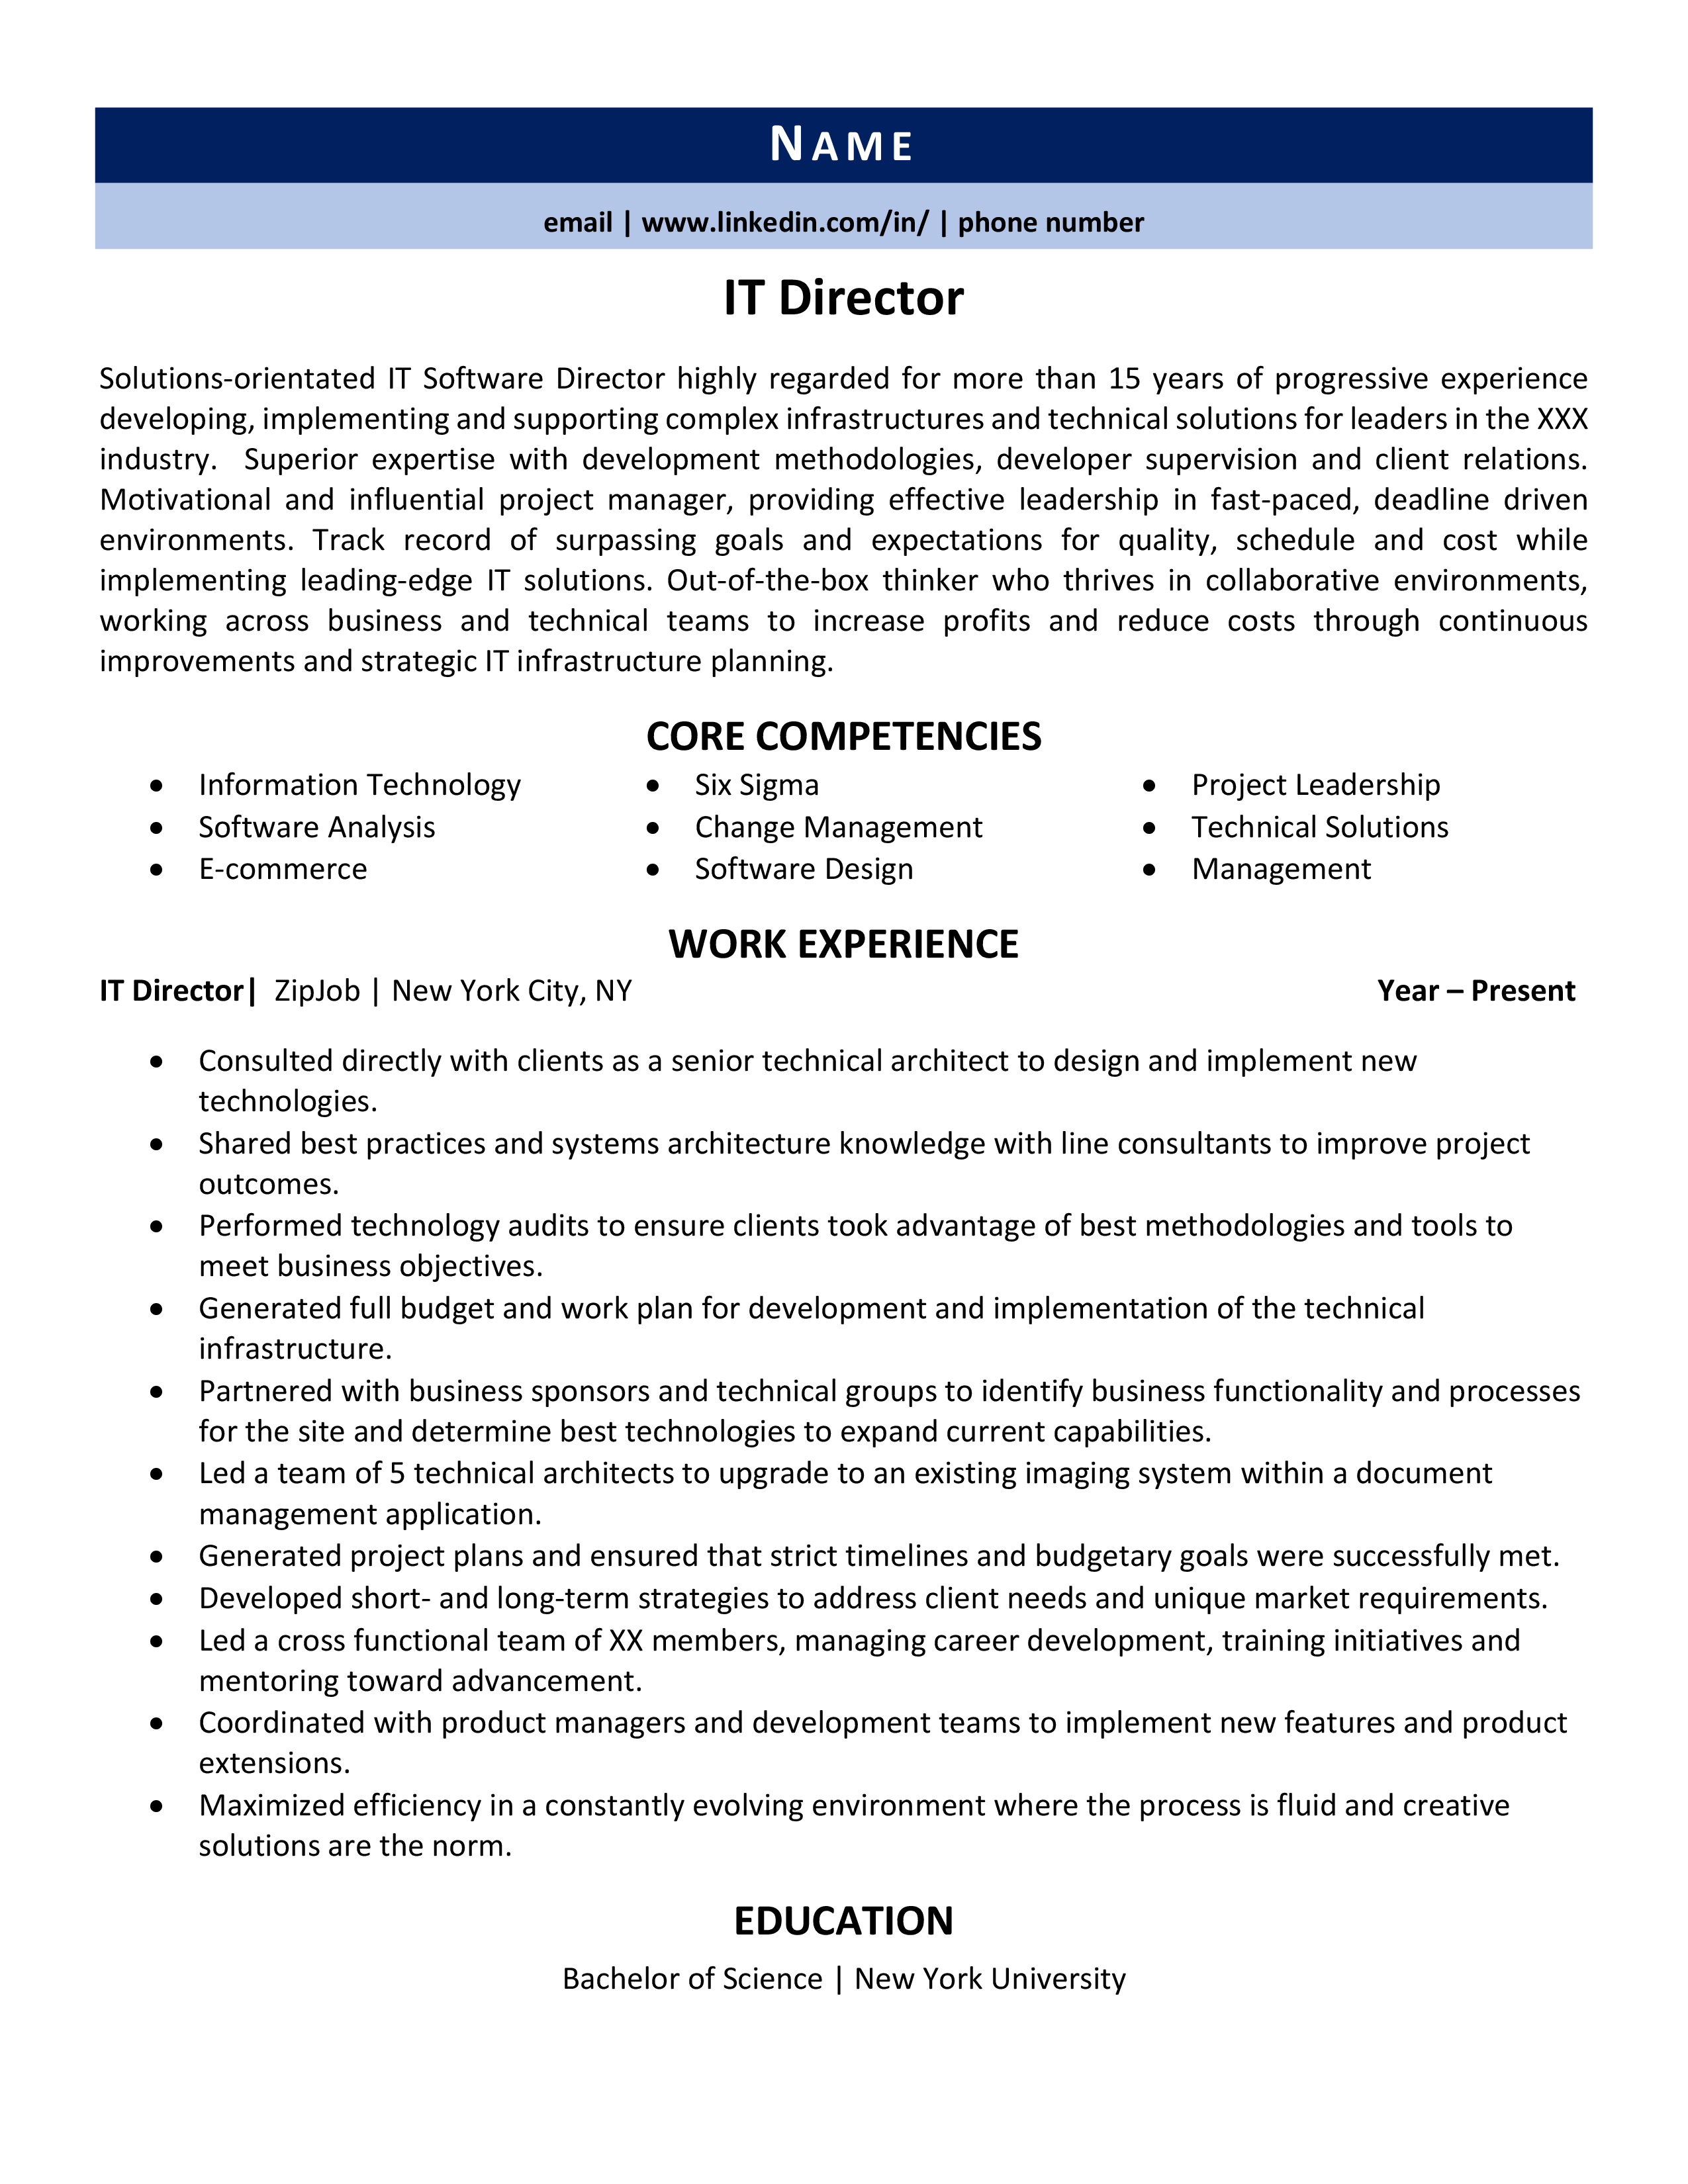 free director level professional resume templates